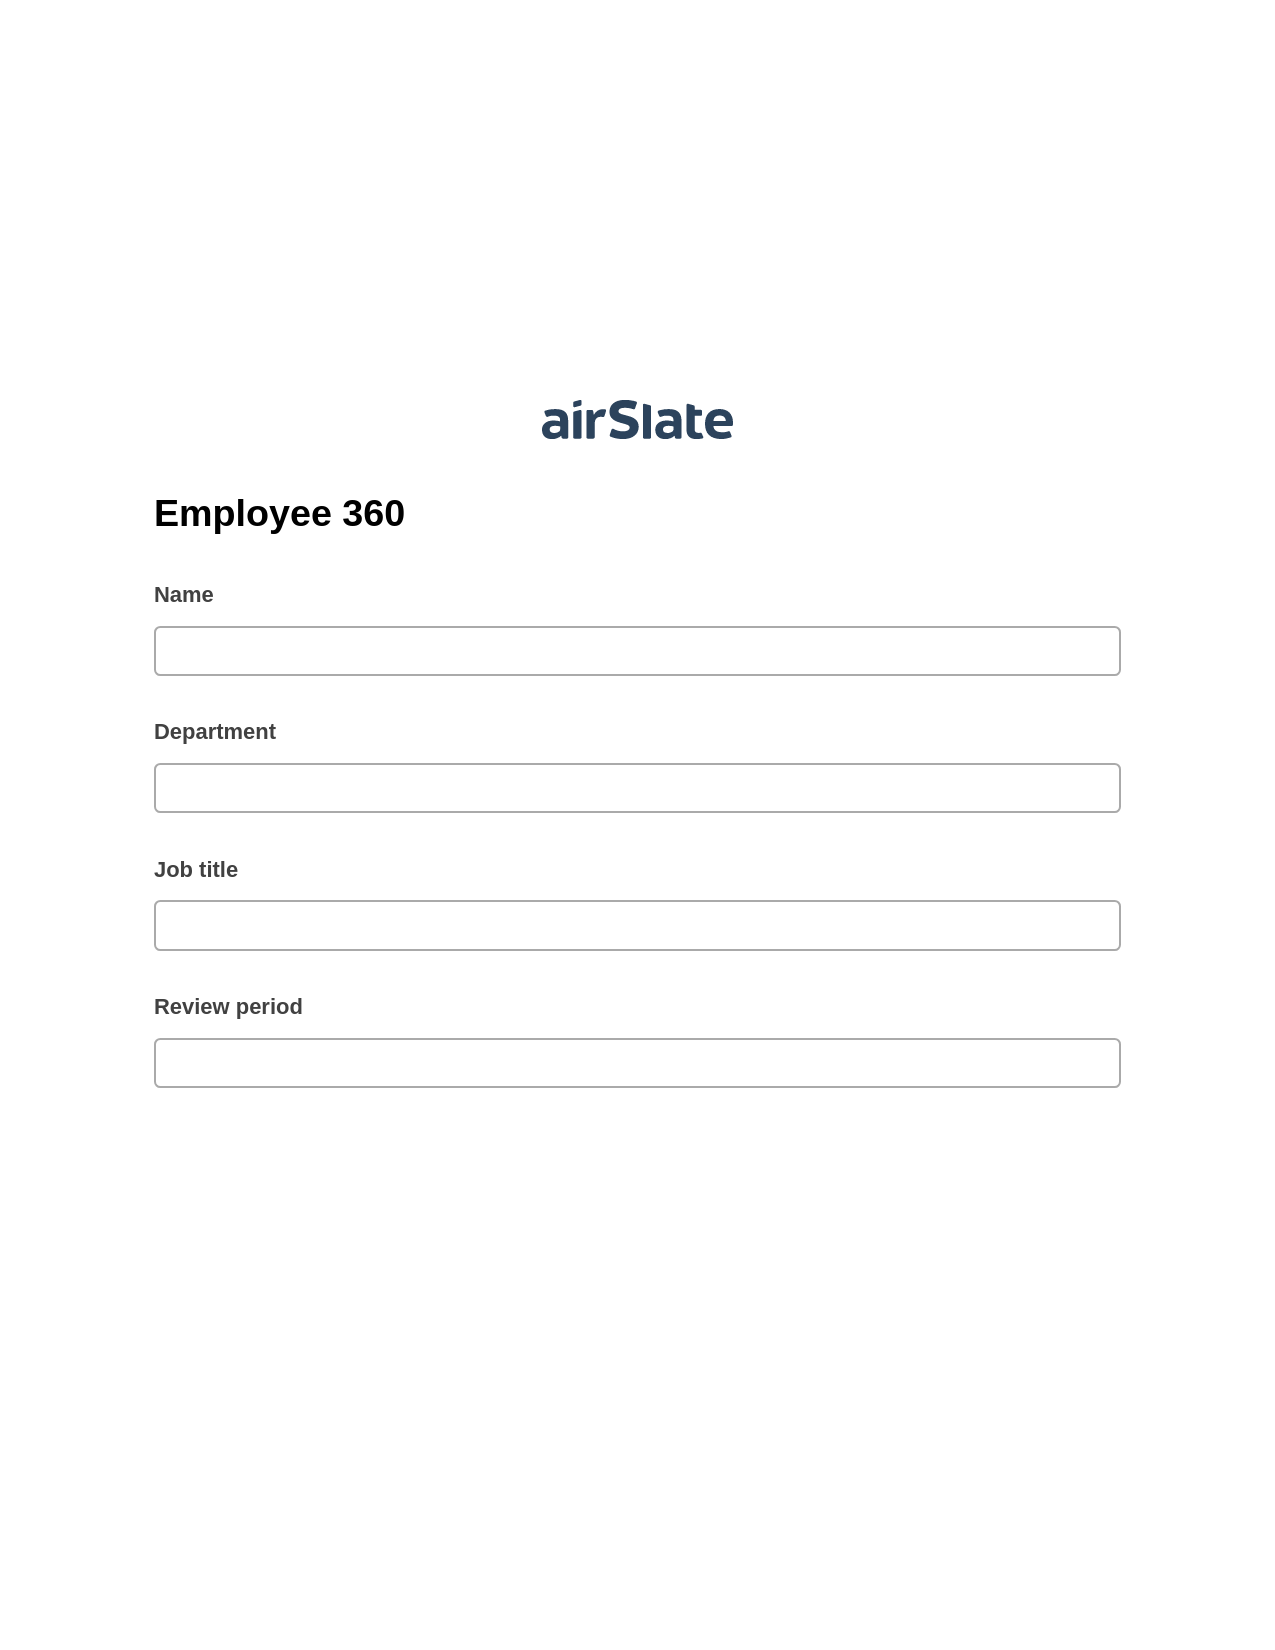 Employee 360 Pre-fill Dropdowns from CSV file Bot, Create MS Dynamics 365 Records Bot, Post-finish Document Bot